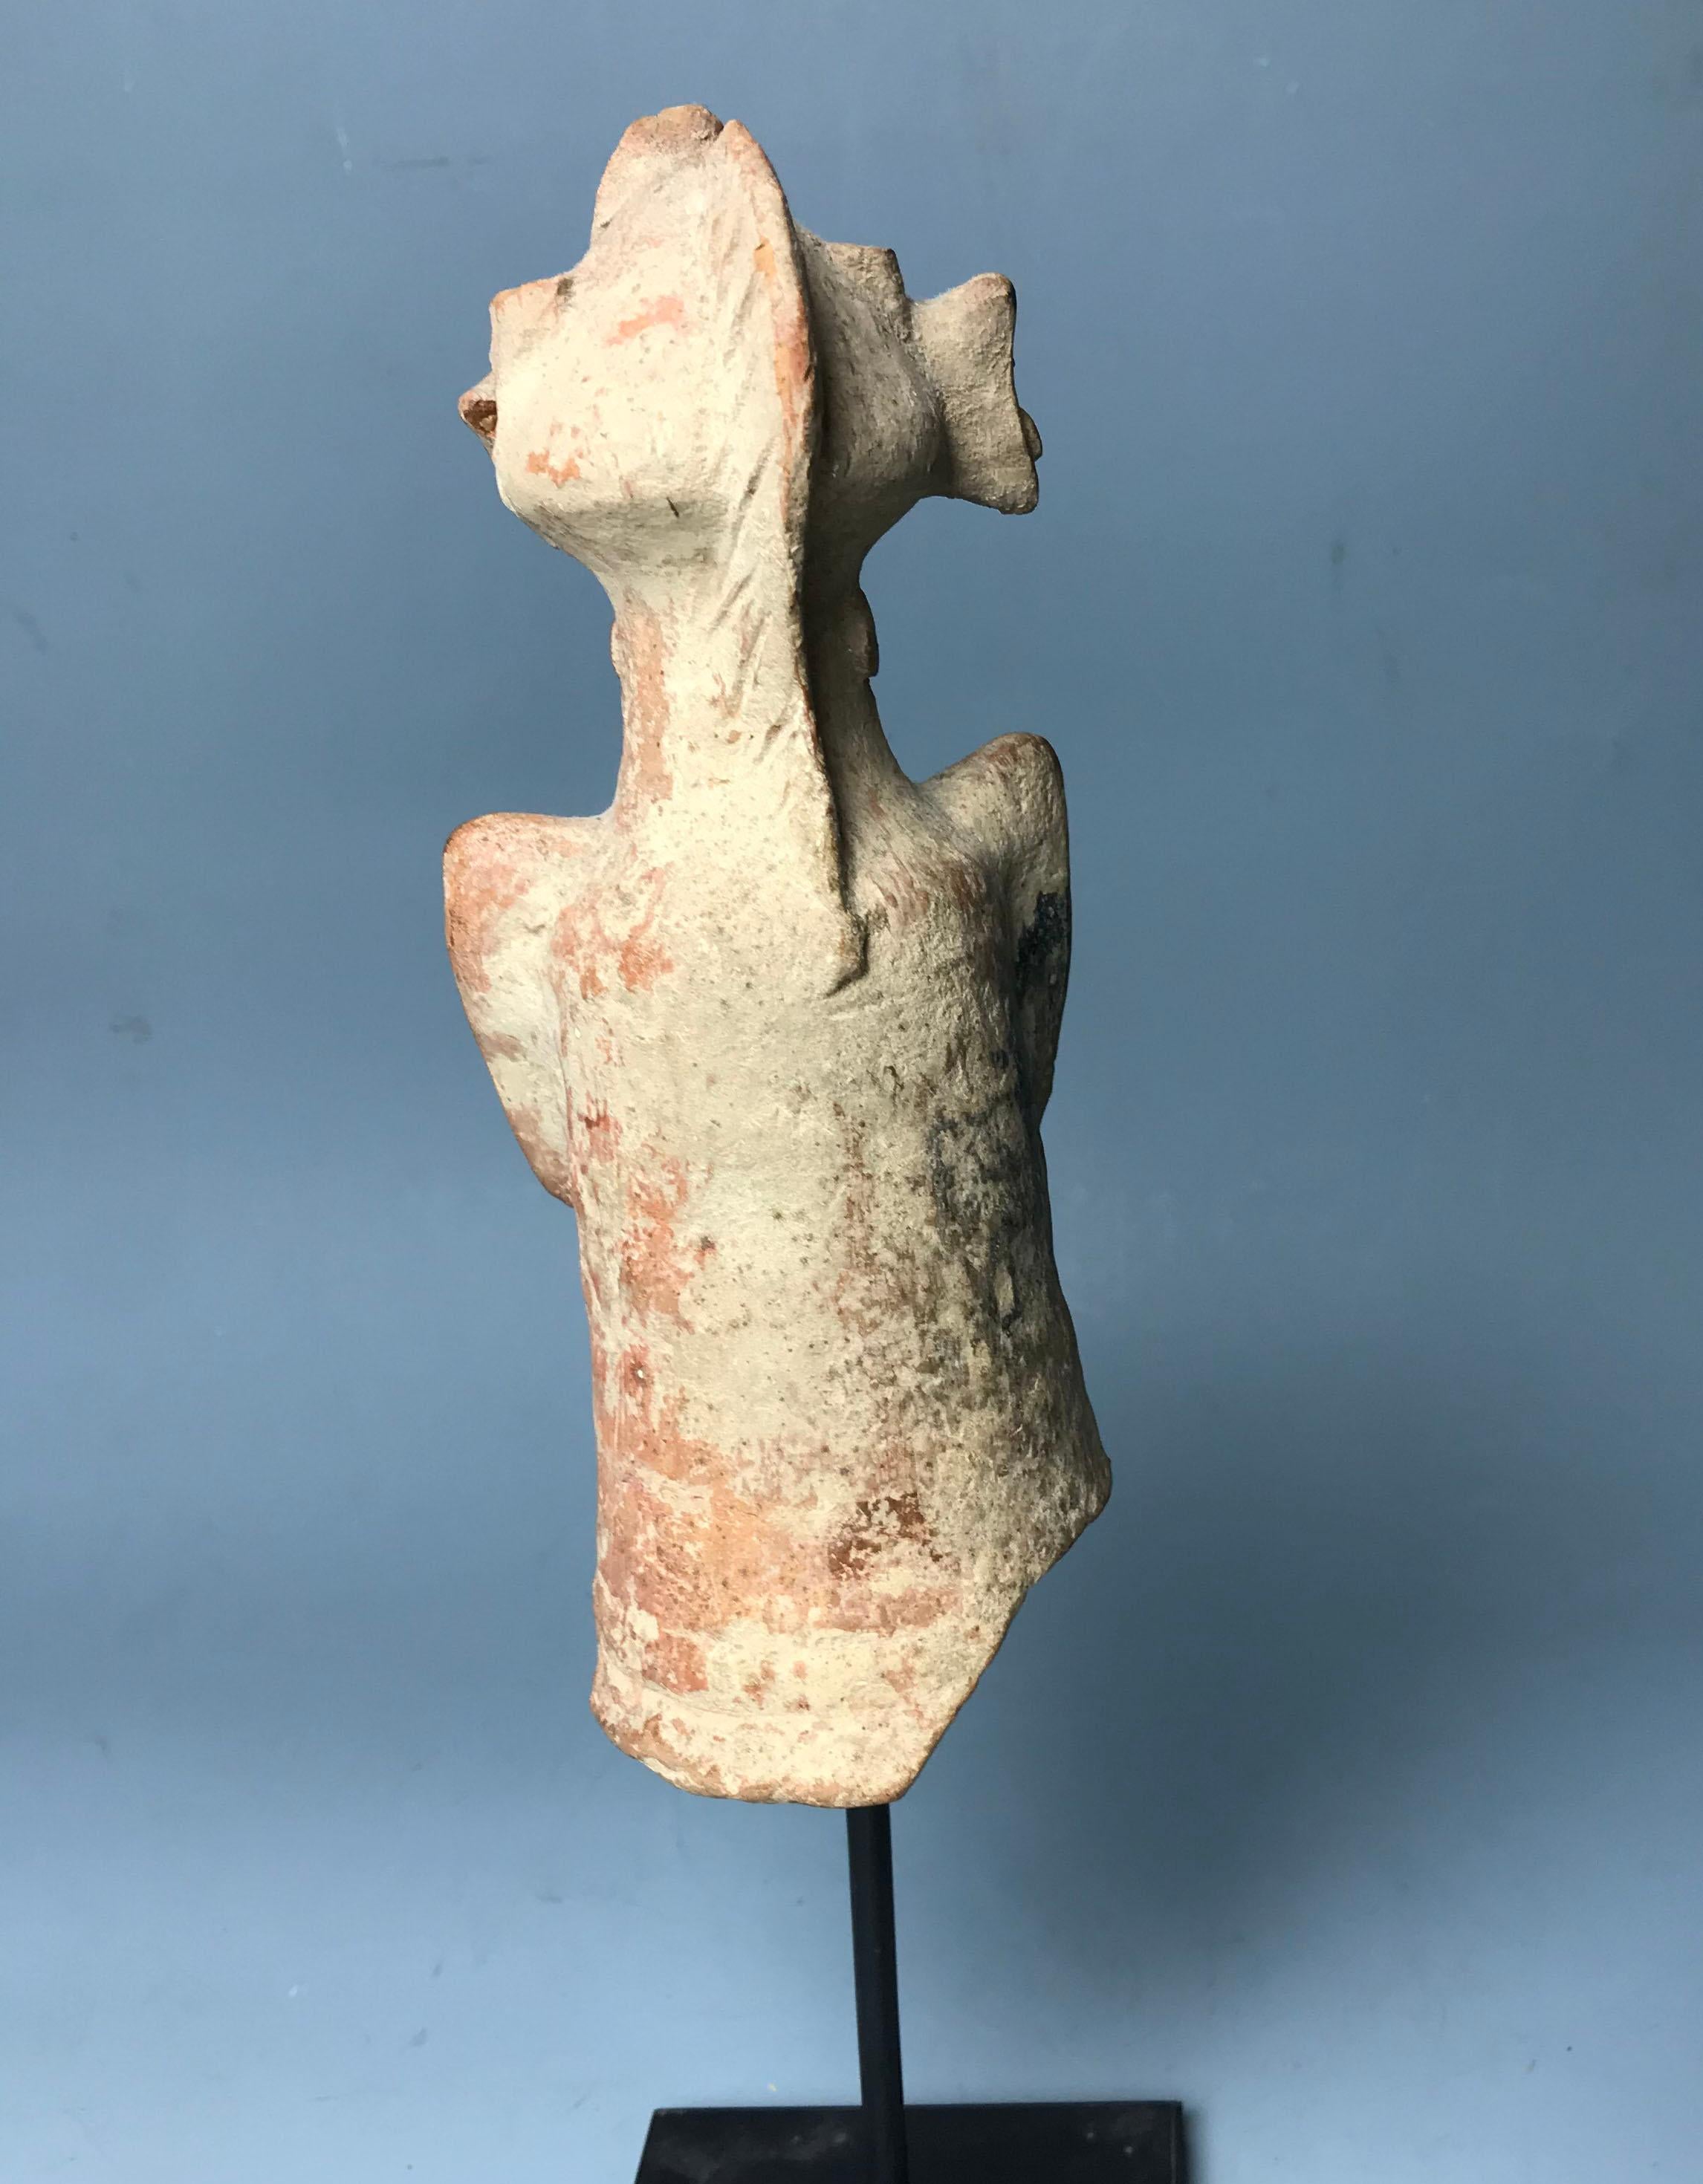 Indian Ancient Indus Valley cup bearer Fertility figurine C (2800-2600 BC).